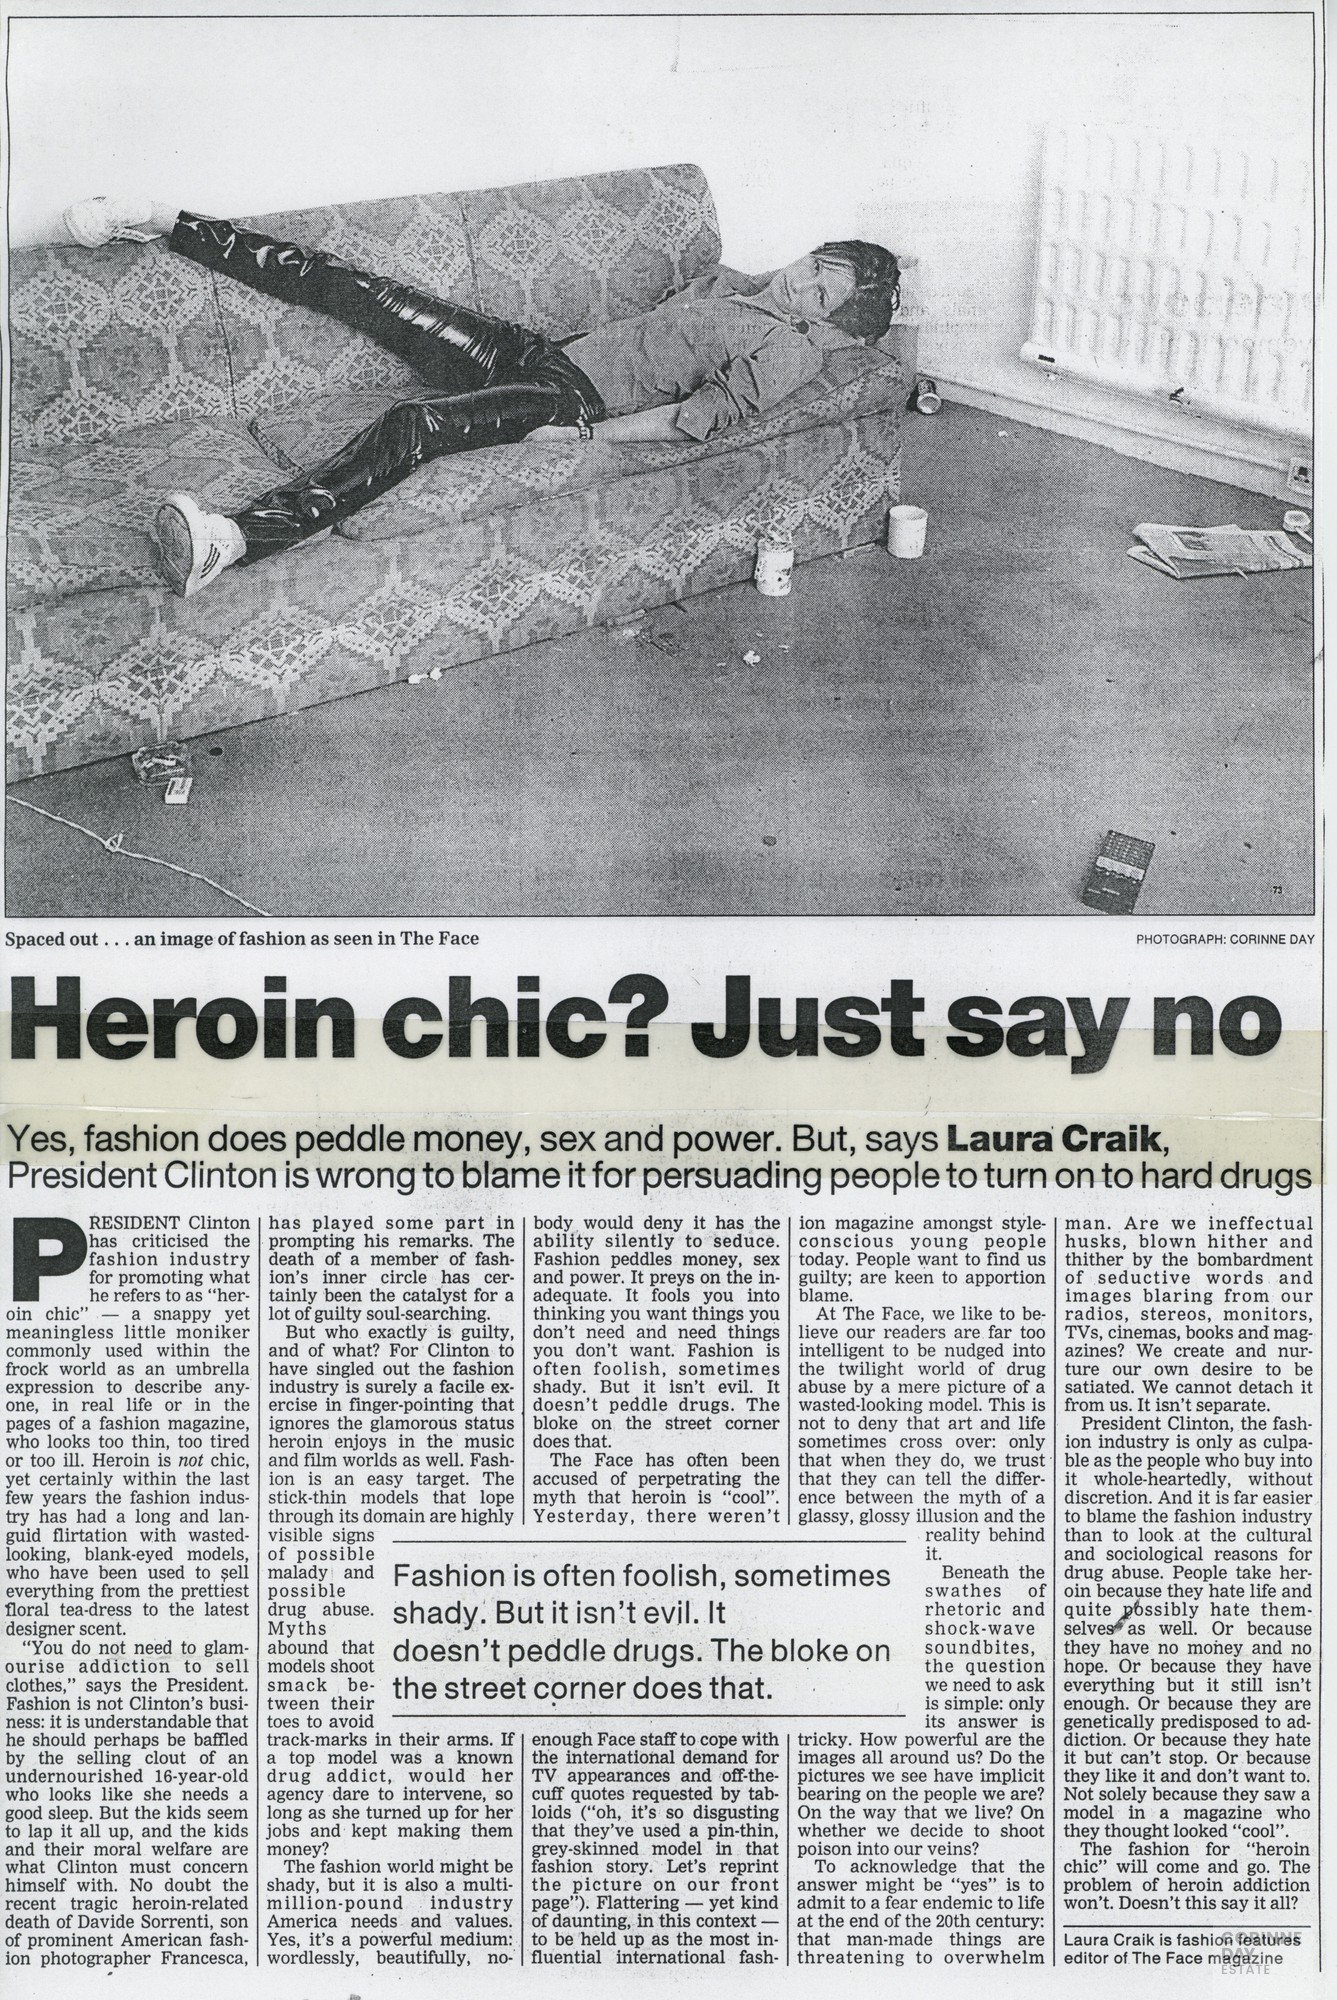 Heroin chic? Just say no, The Face, 1993 — Image 1 of 1